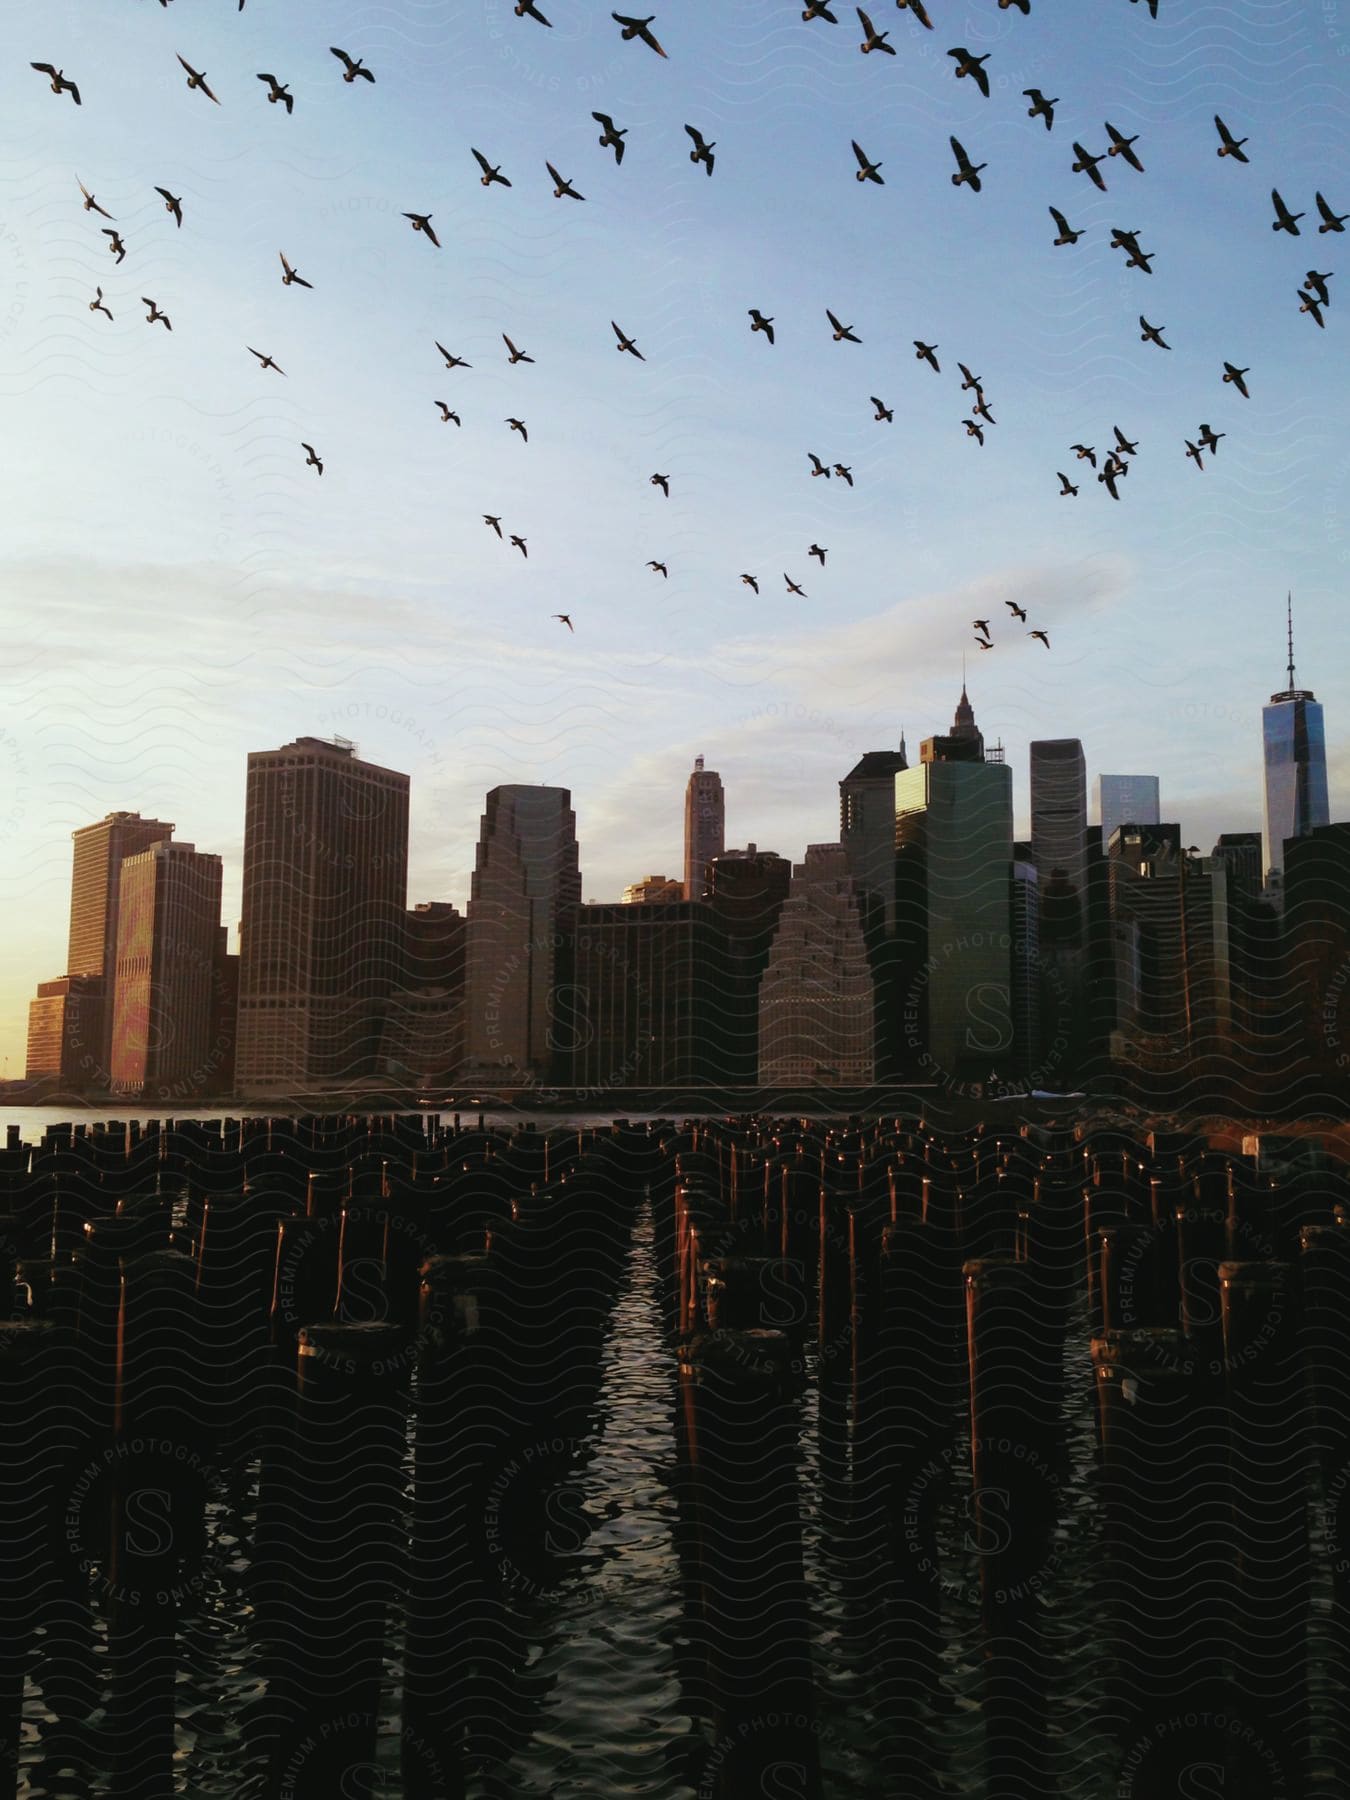 Stock photo of a city skyline with a body of water and birds flying in the sky